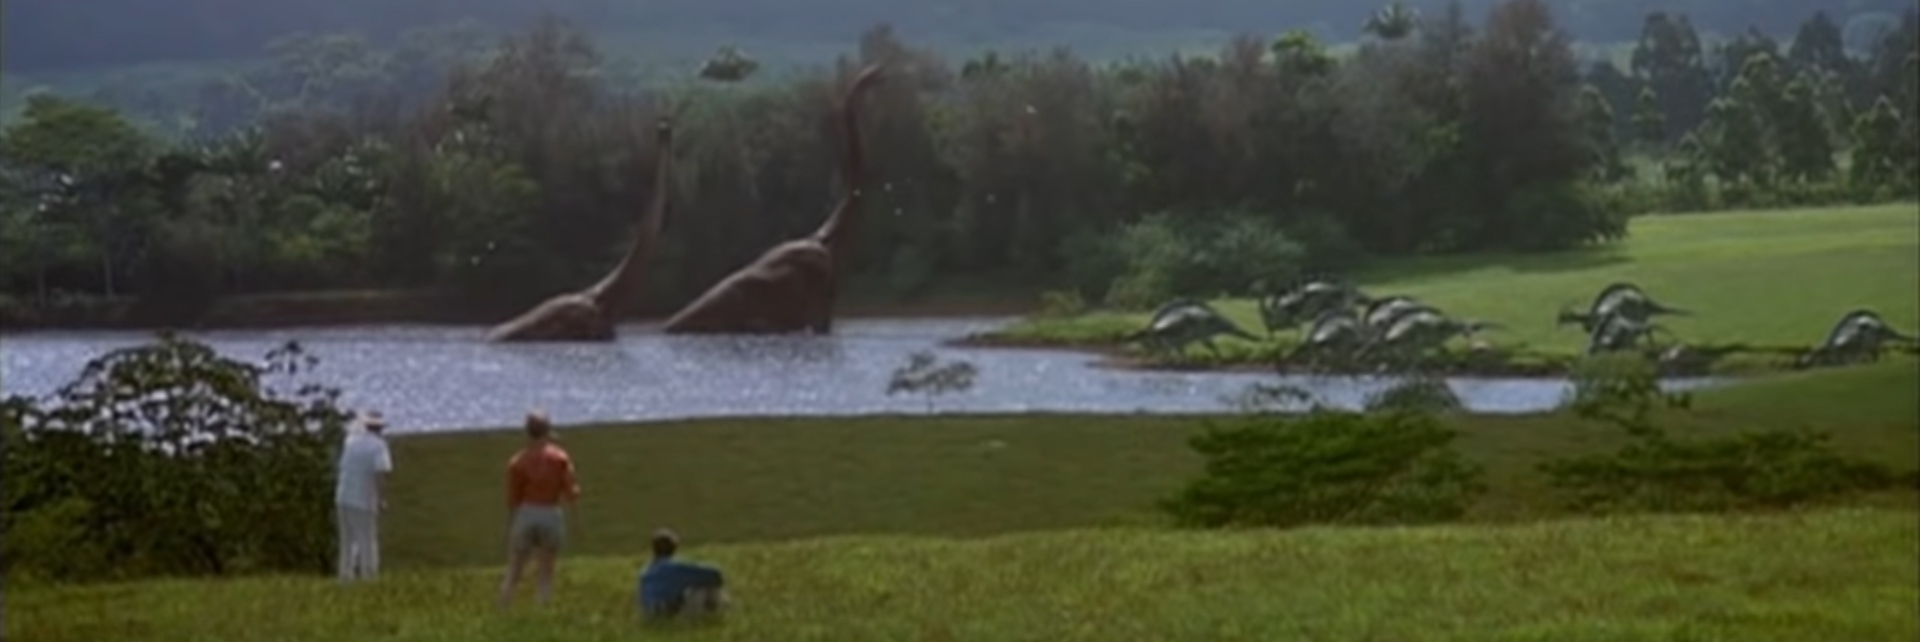 Jurassic Park. Image Credit: Universal Pictures